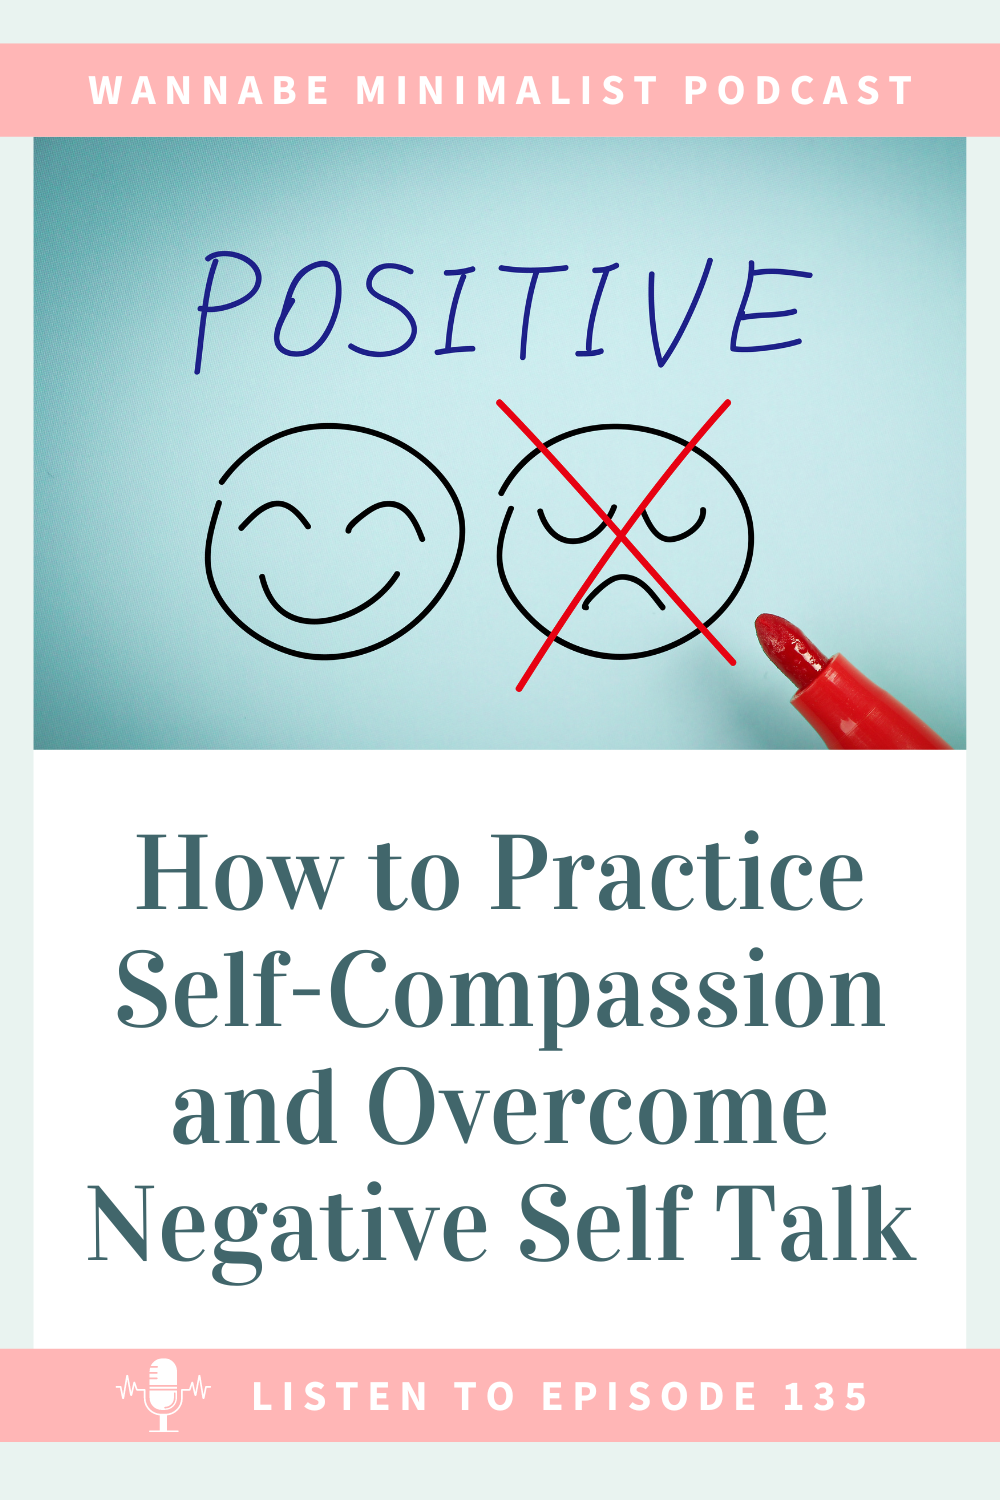 How to Practice Self Compassion and Overcome Negative Self Talk